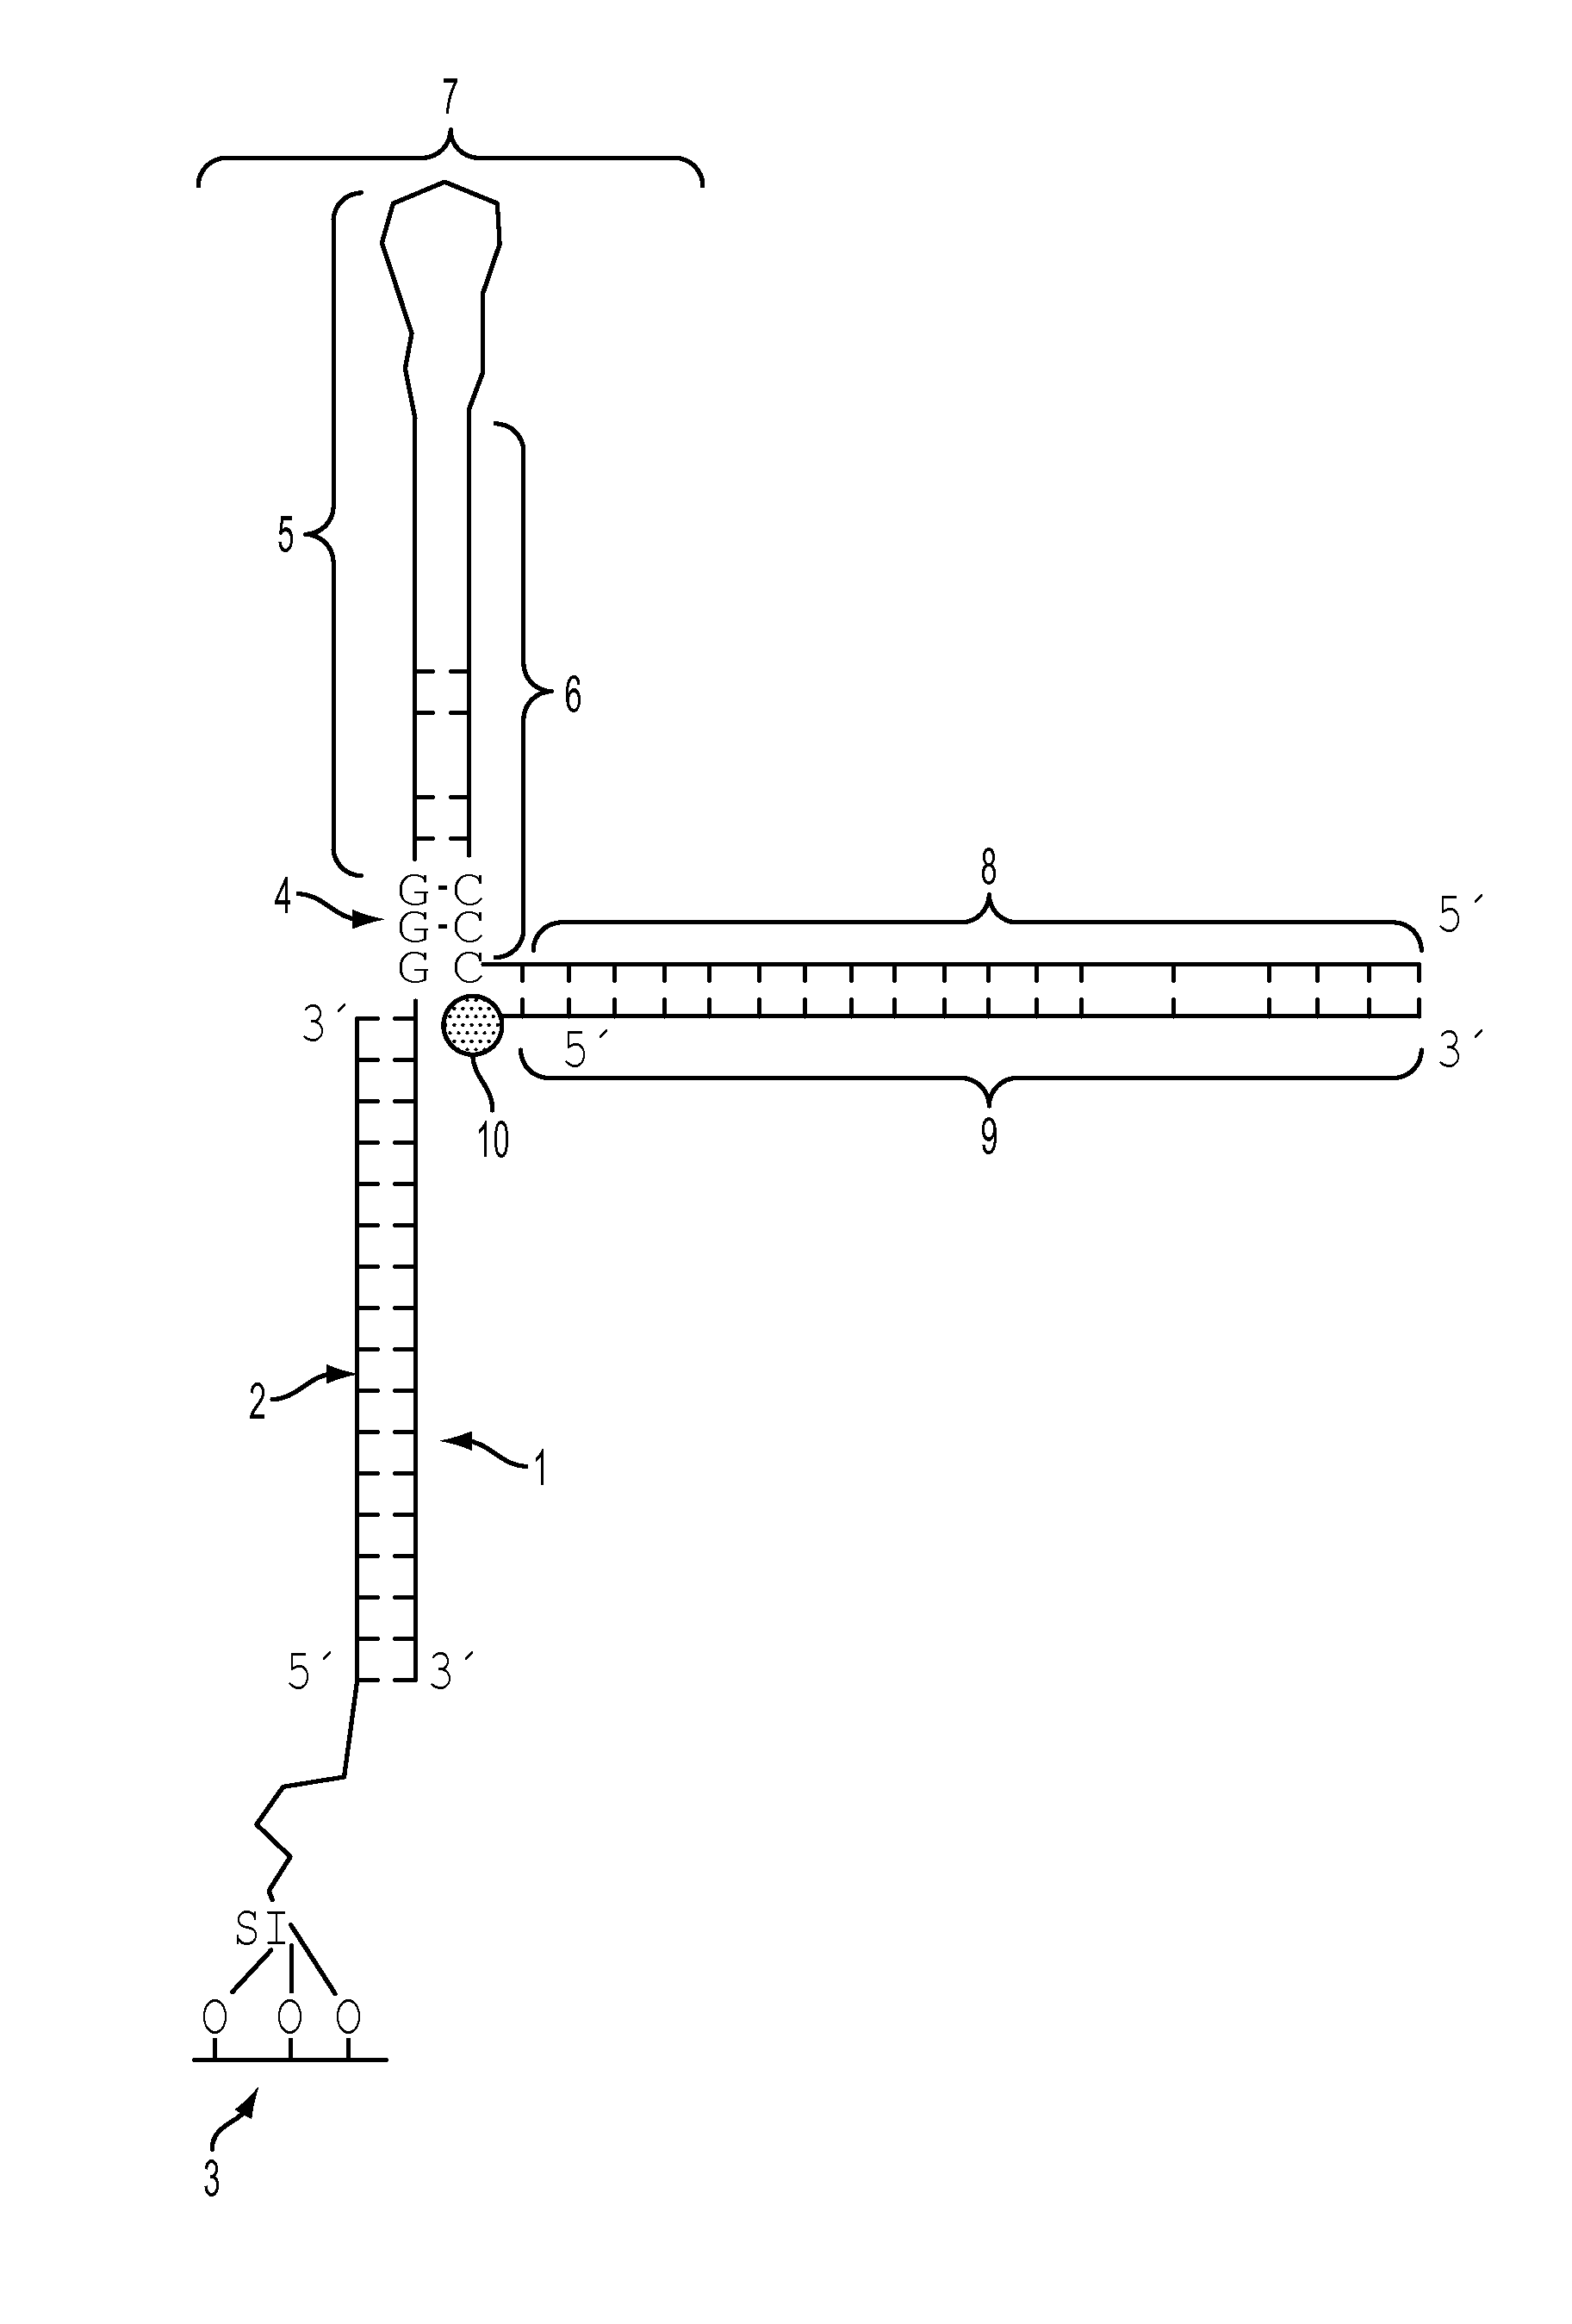 Methods for Detecting and Measuring Specific Nucleic Acid Sequences